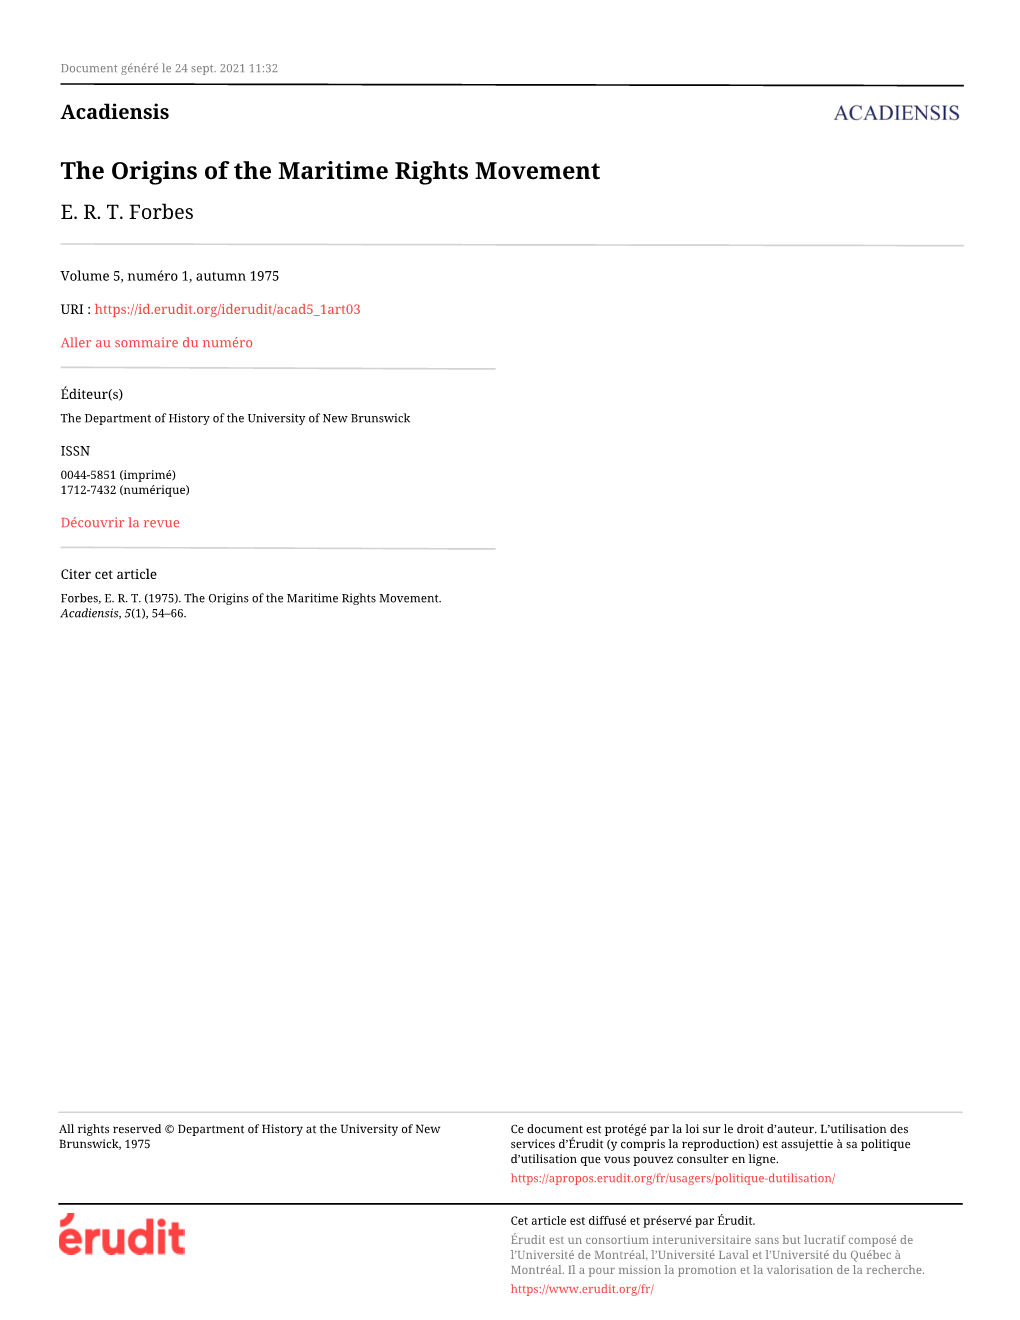 The Origins of the Maritime Rights Movement E